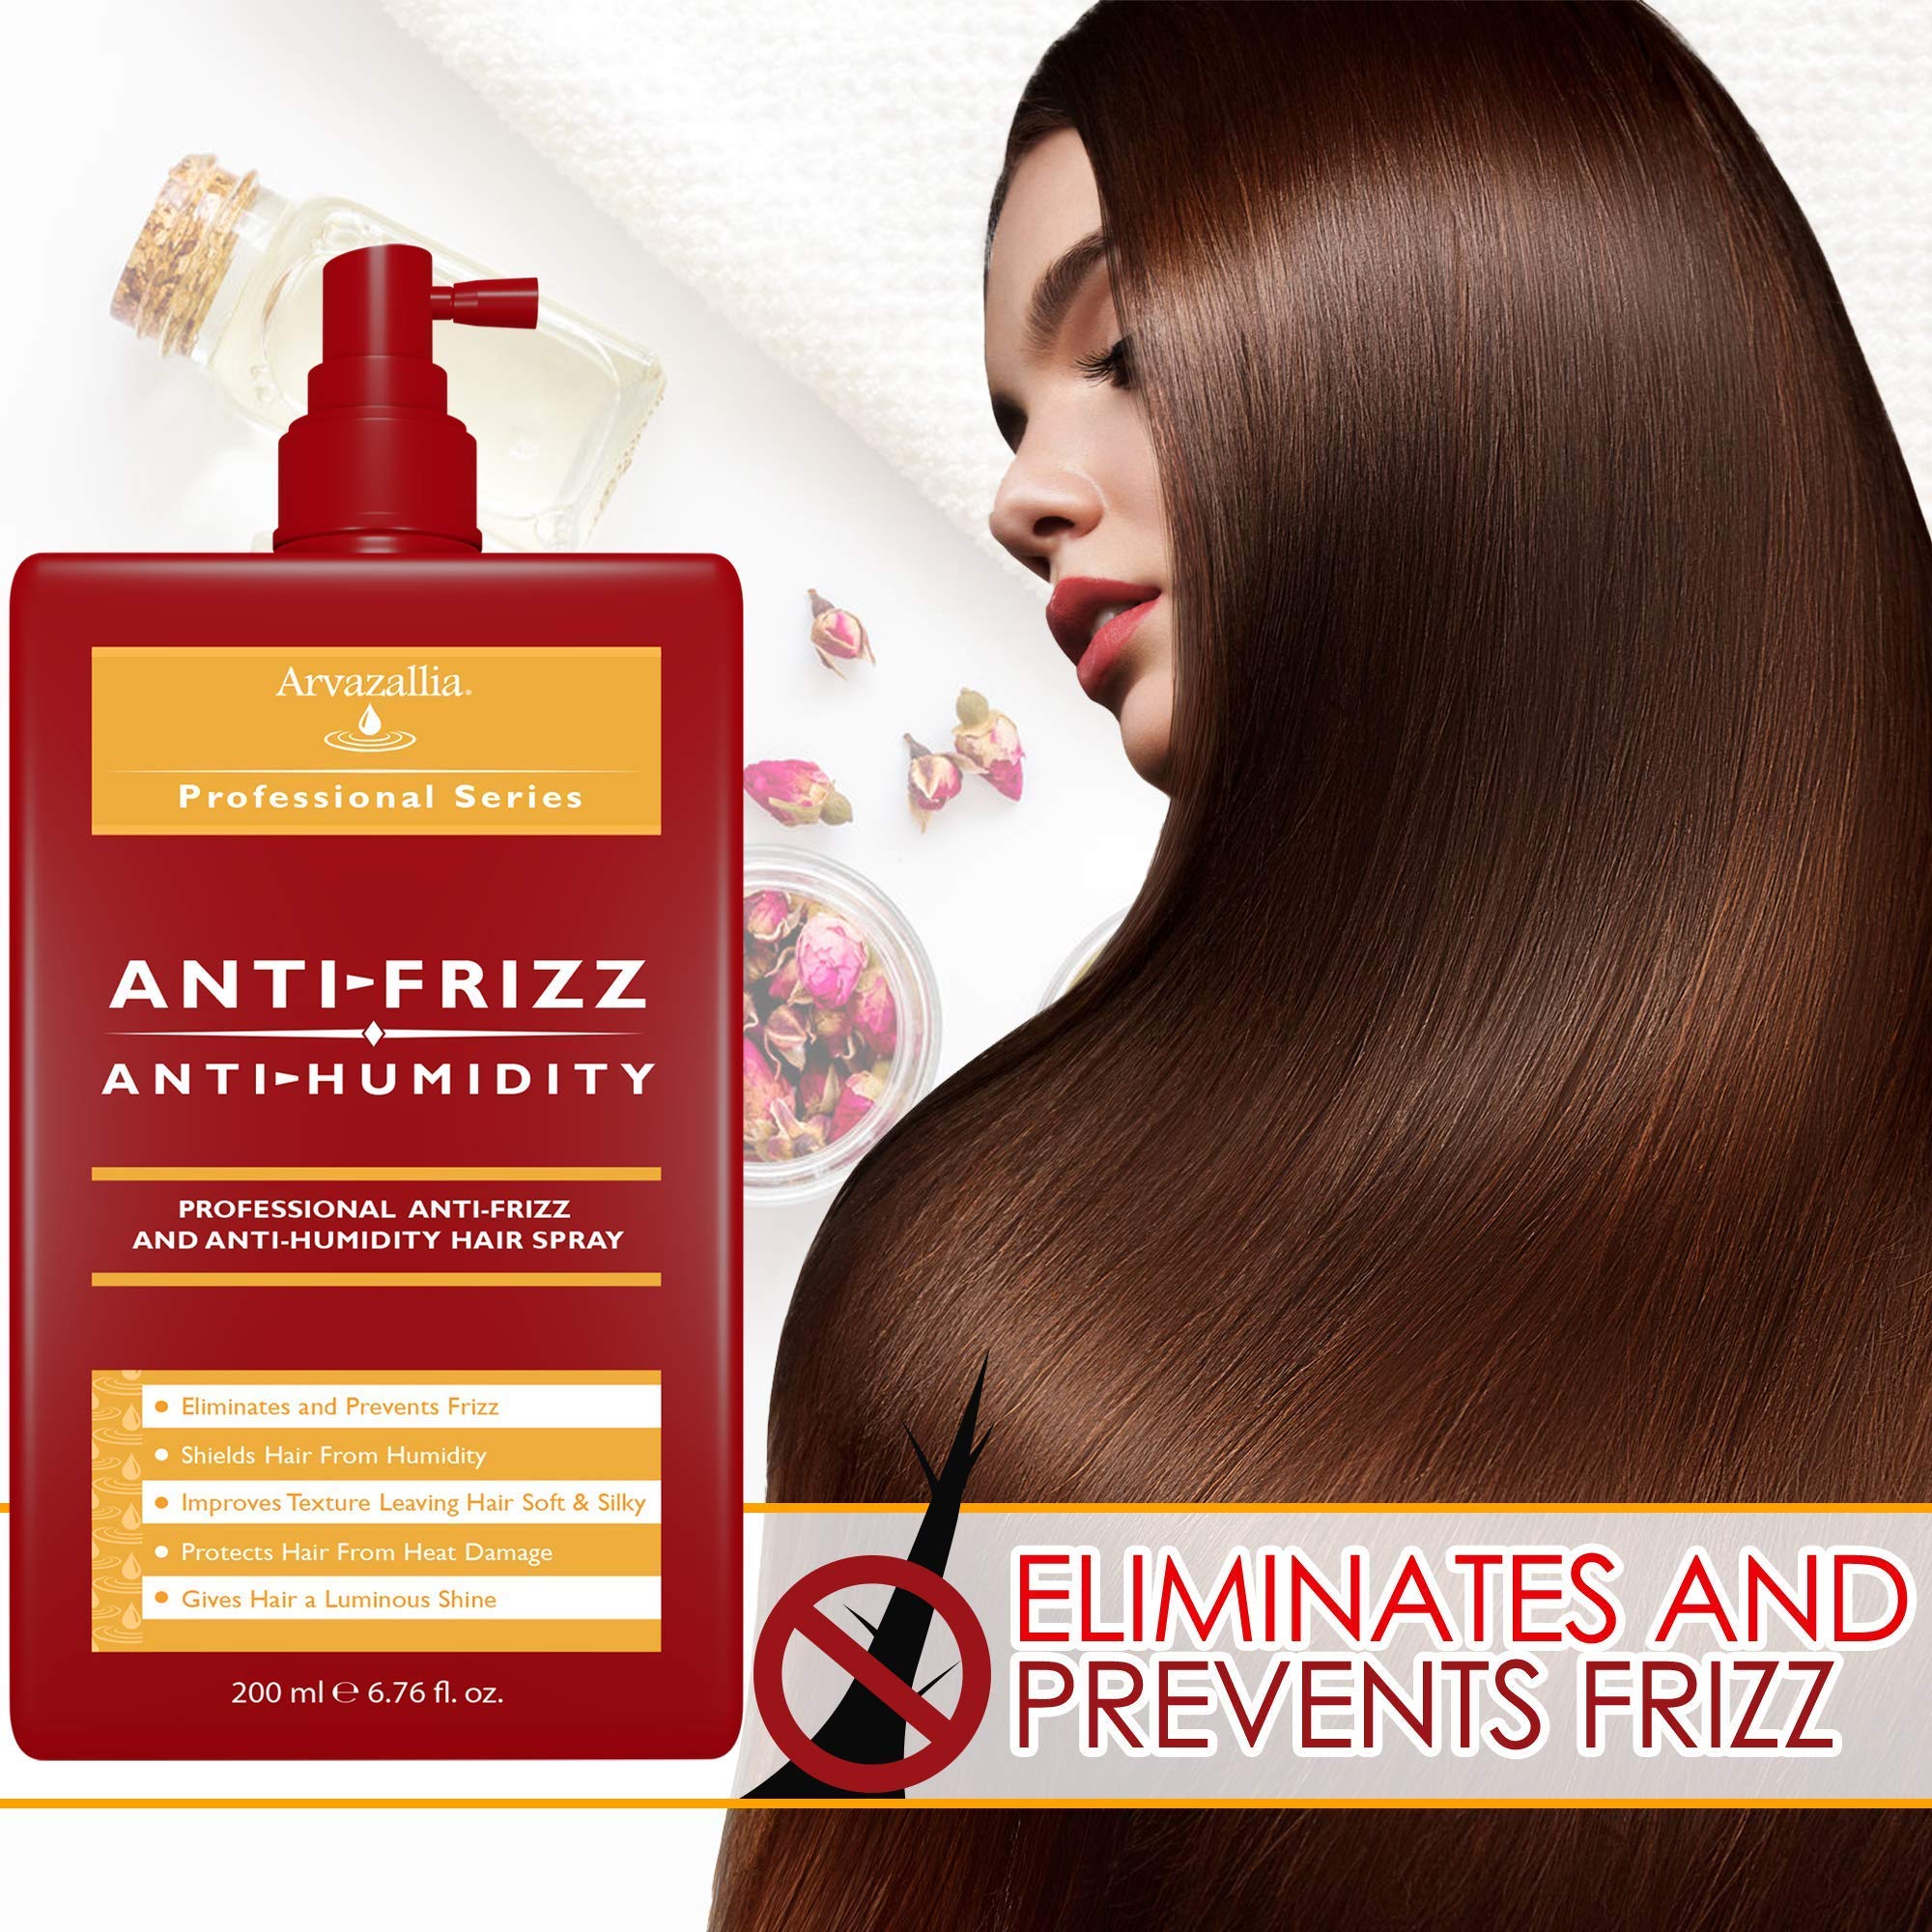 Hydrating Argan Oil Hair Mask and Anti-Frizz Anti-Humidity Spray Treatment Bundle - Professional Grade Deep Conditioning , Frizz Control , and Humidity Shield by Arvazallia